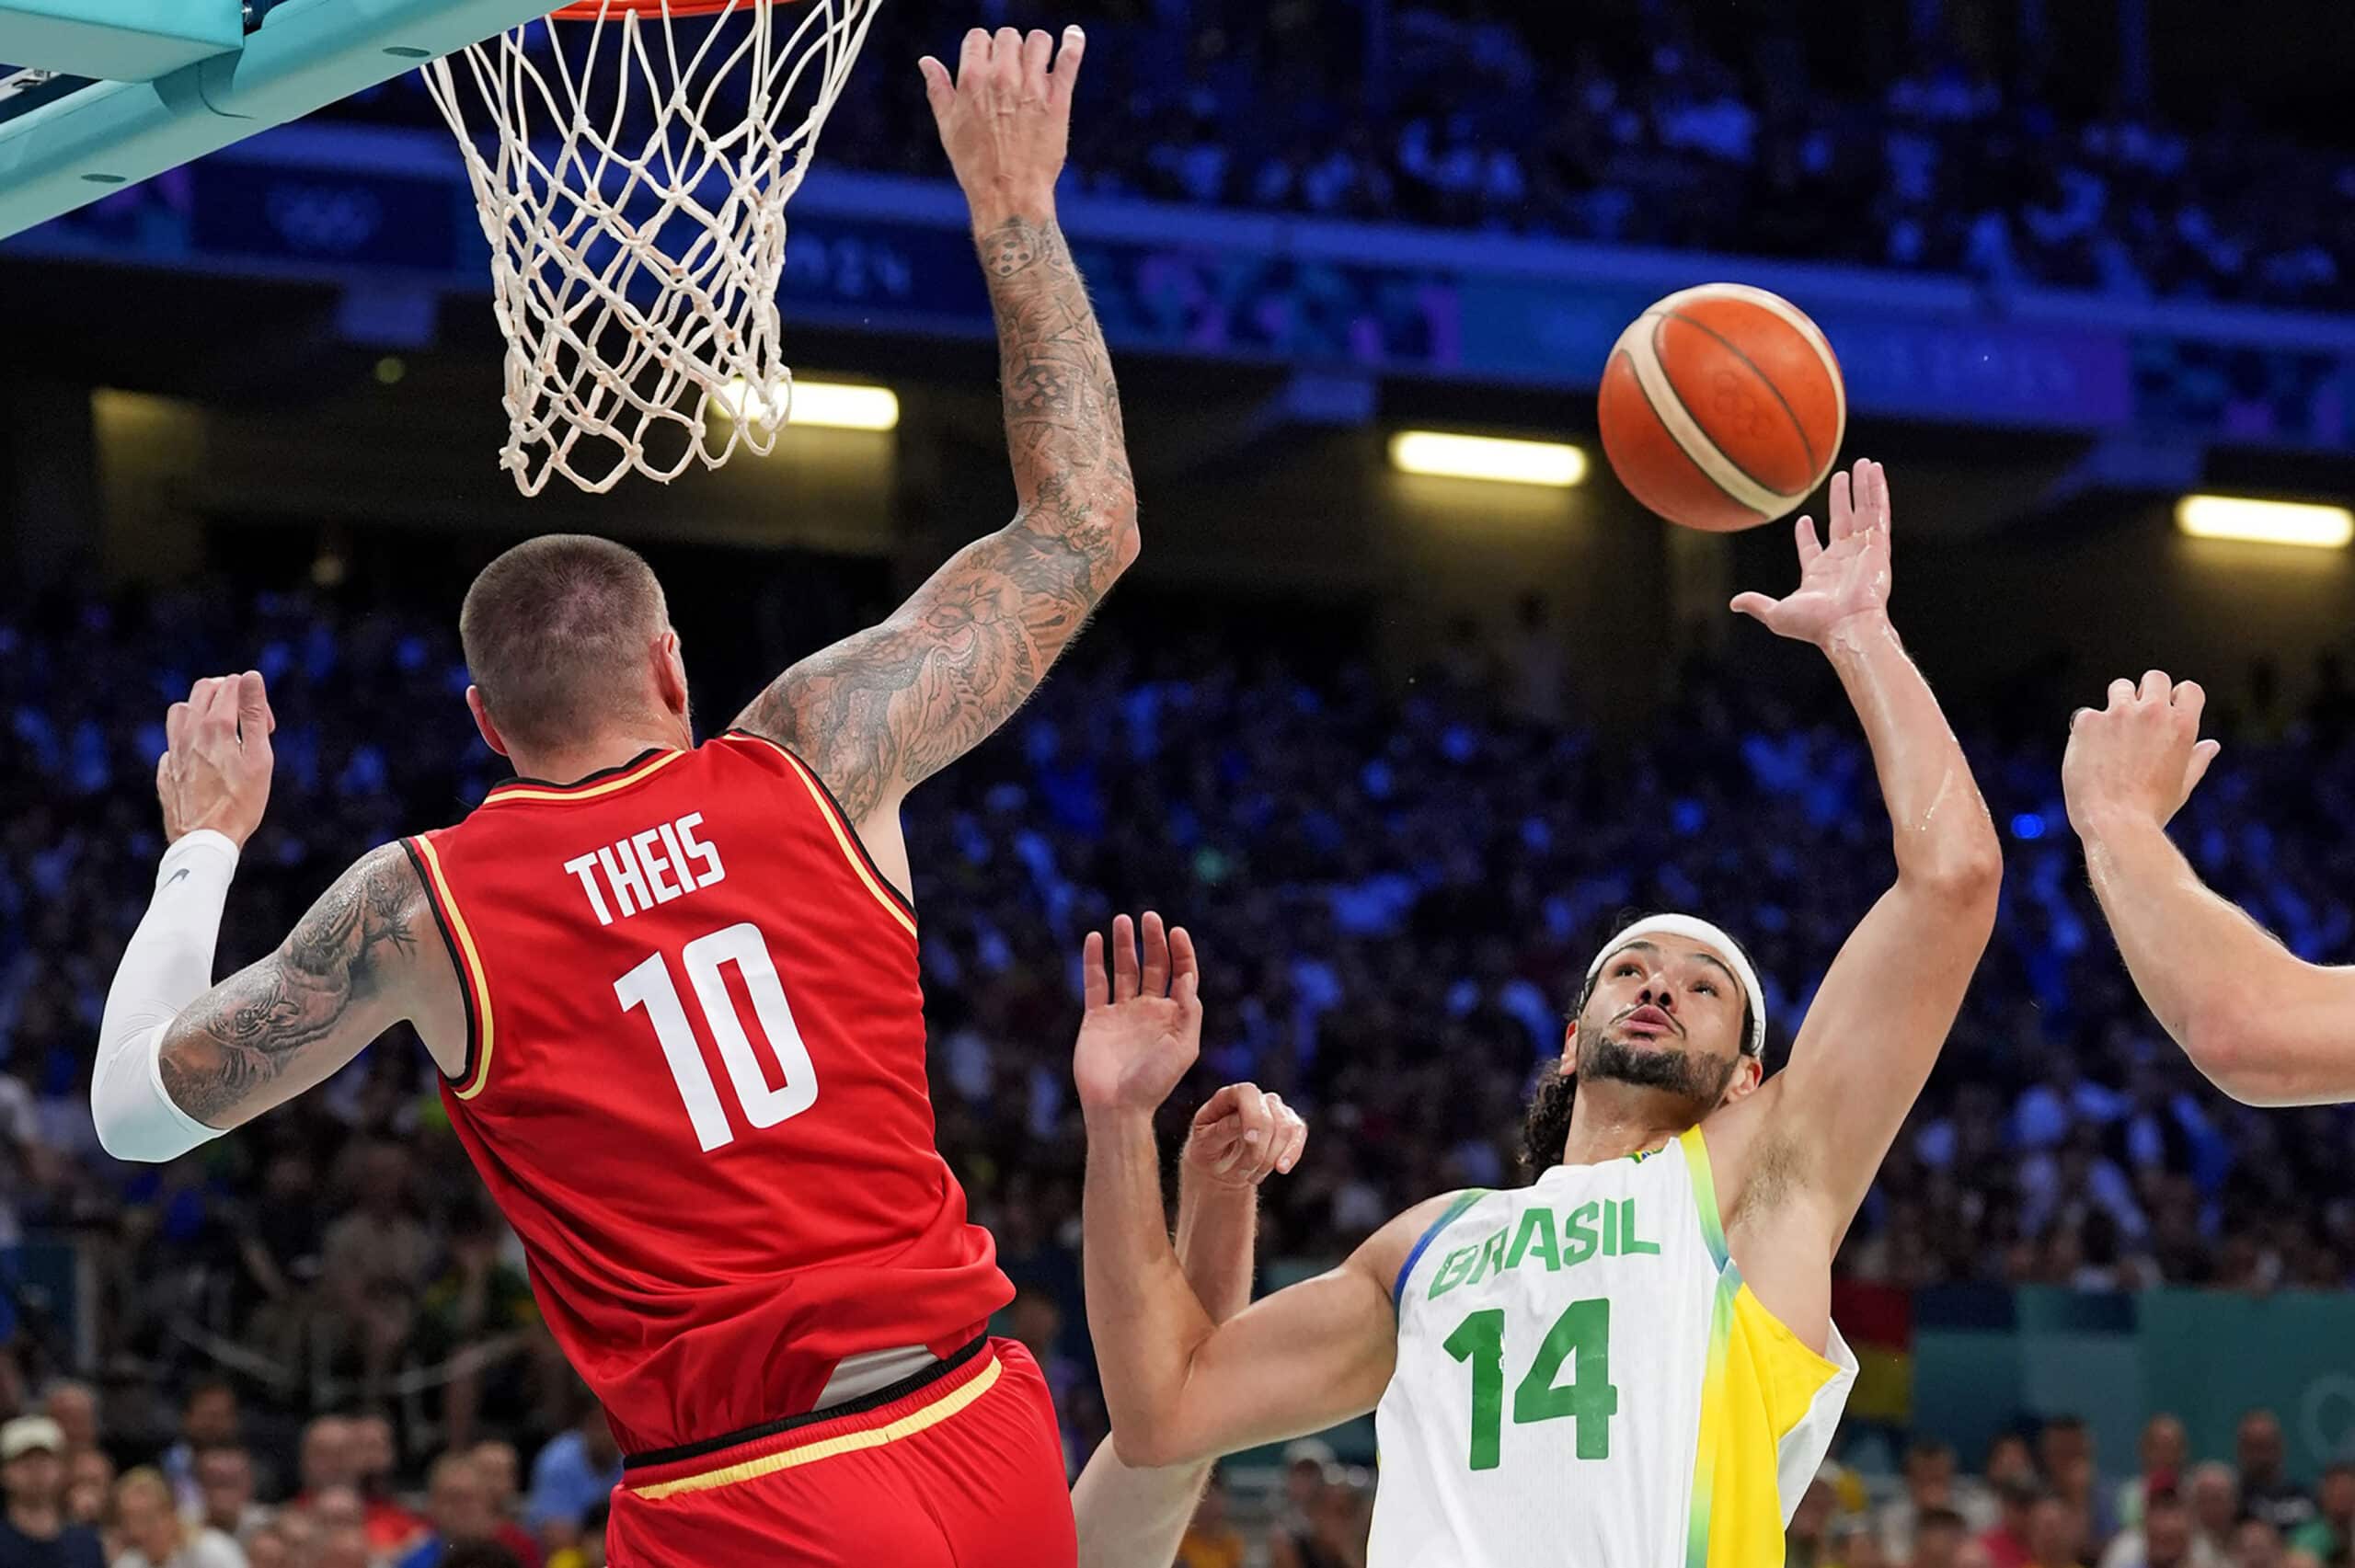 Germany power forward Daniel Theis (10) and Brazil small forward Leo Meindl (14) go for the ball in men’s basketball group B play during the Paris 2024 Olympic Summer Games at Stade Pierre-Mauroy. 